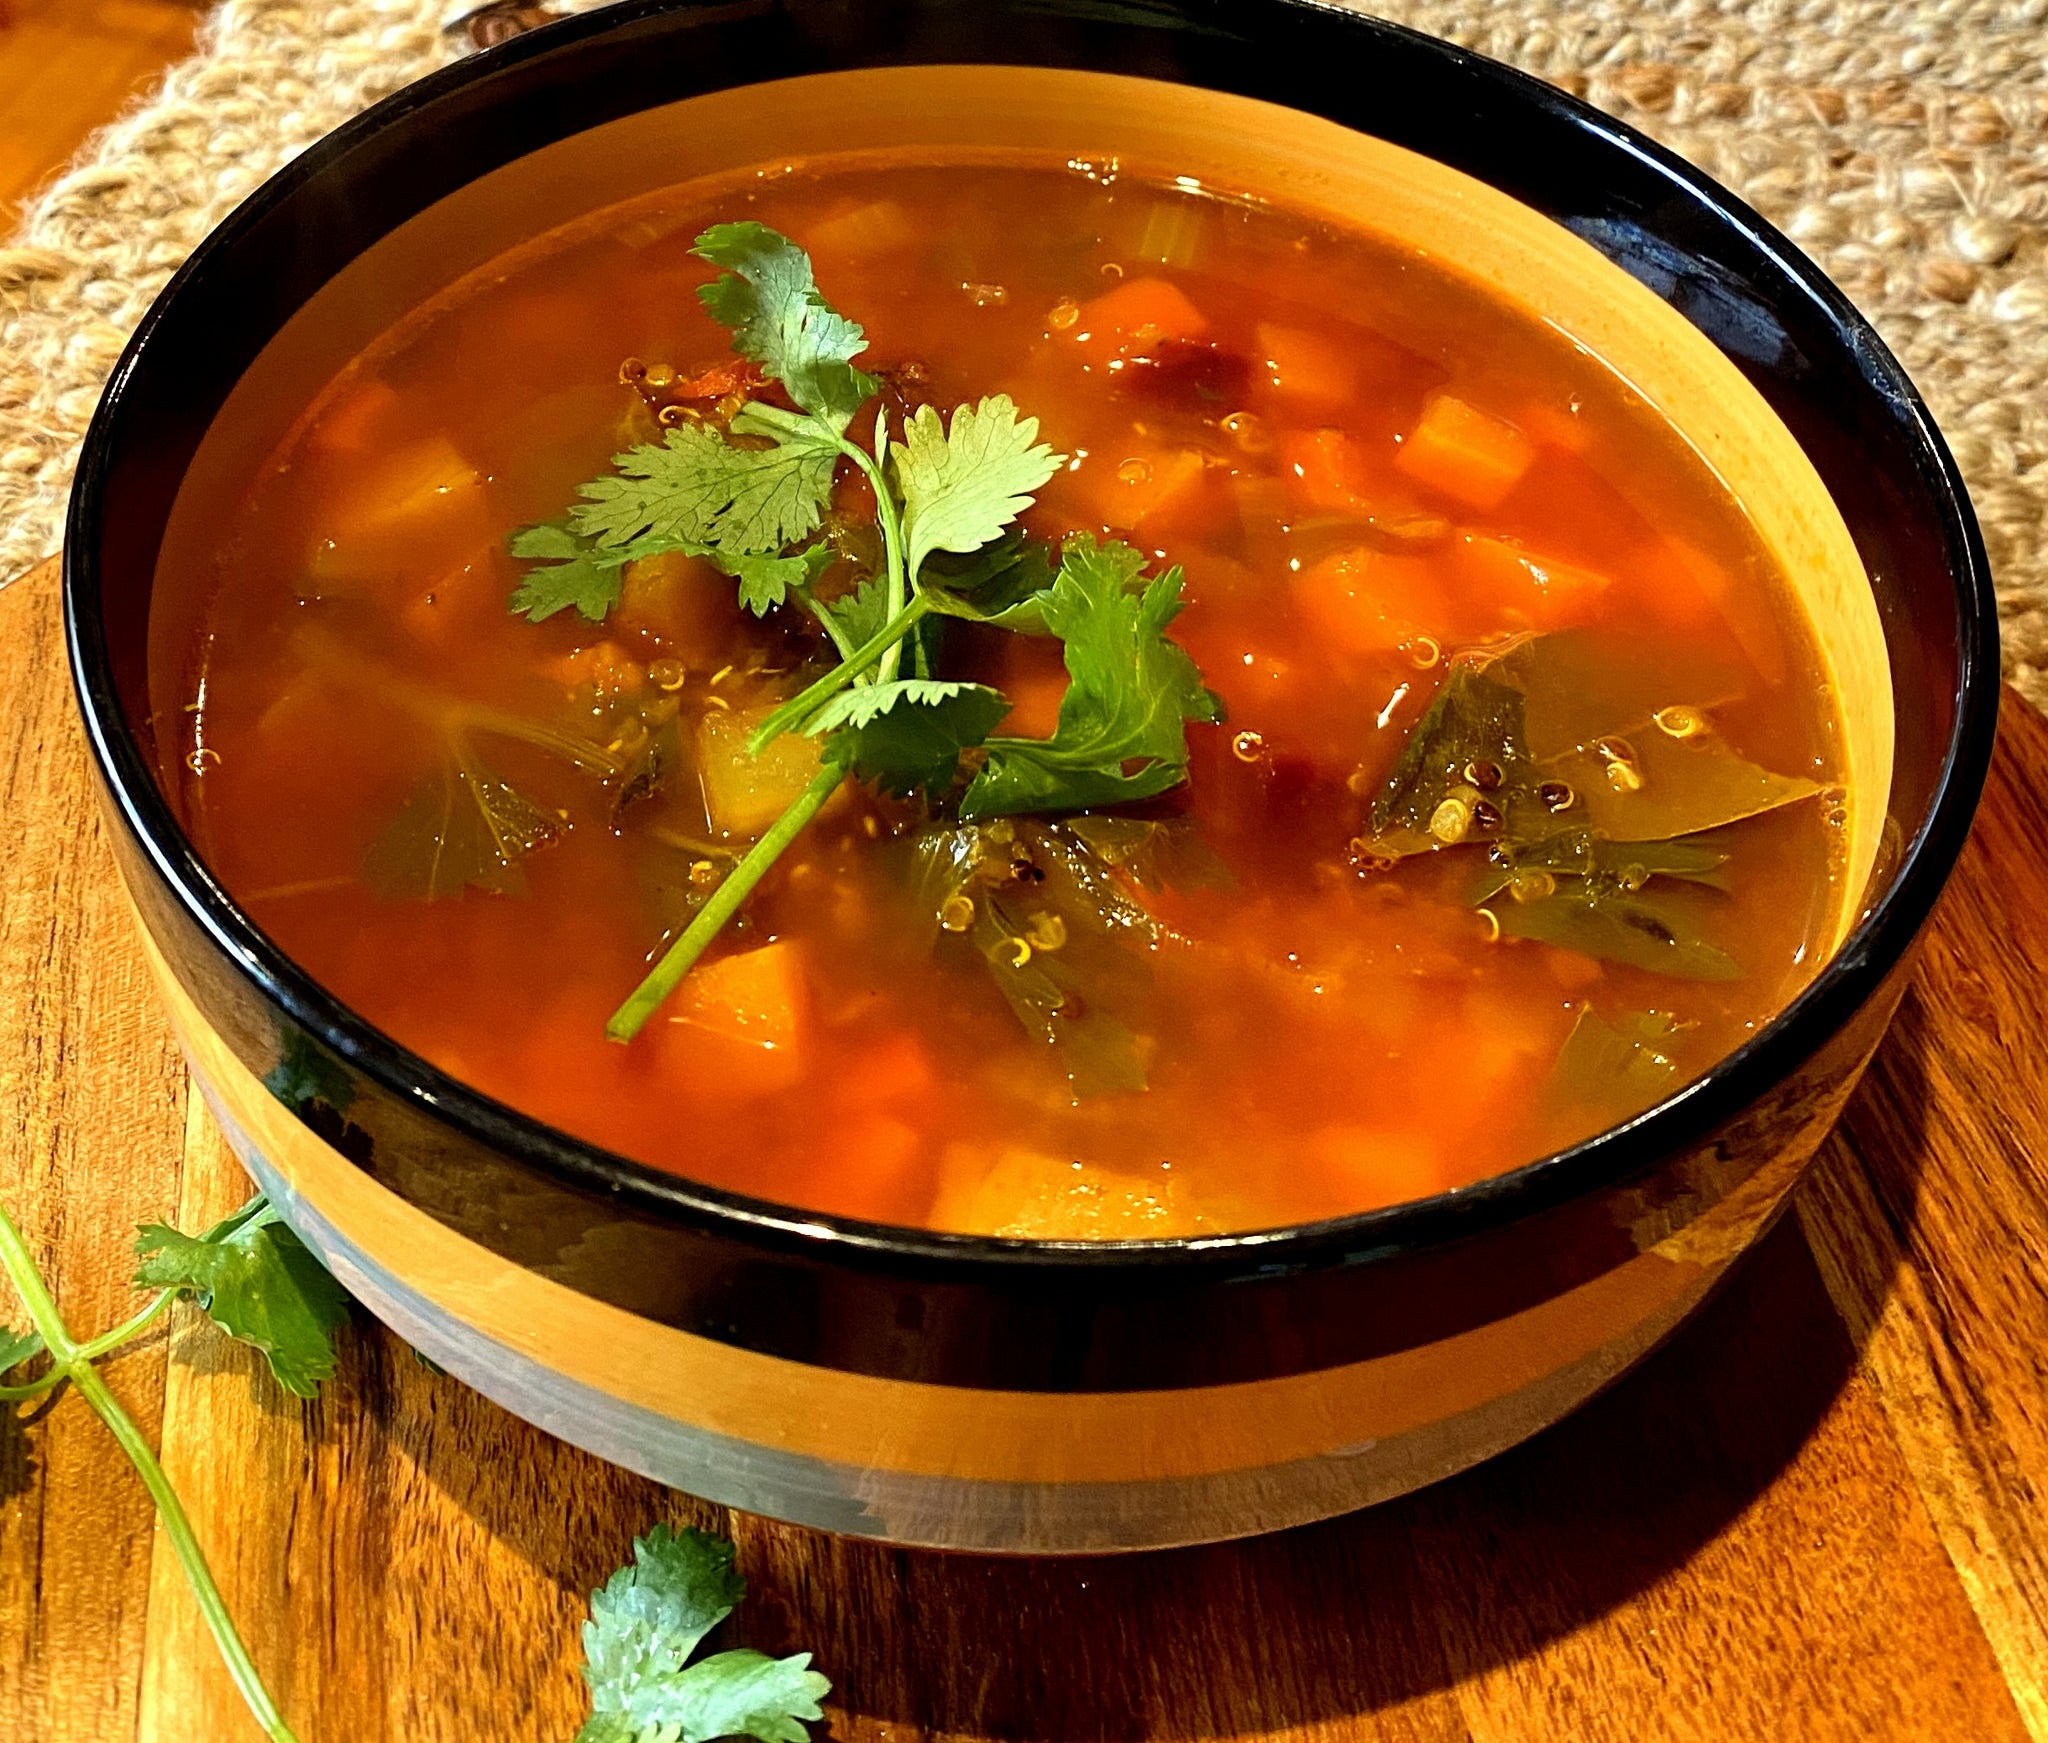 What about a really nice warming healthy soup?